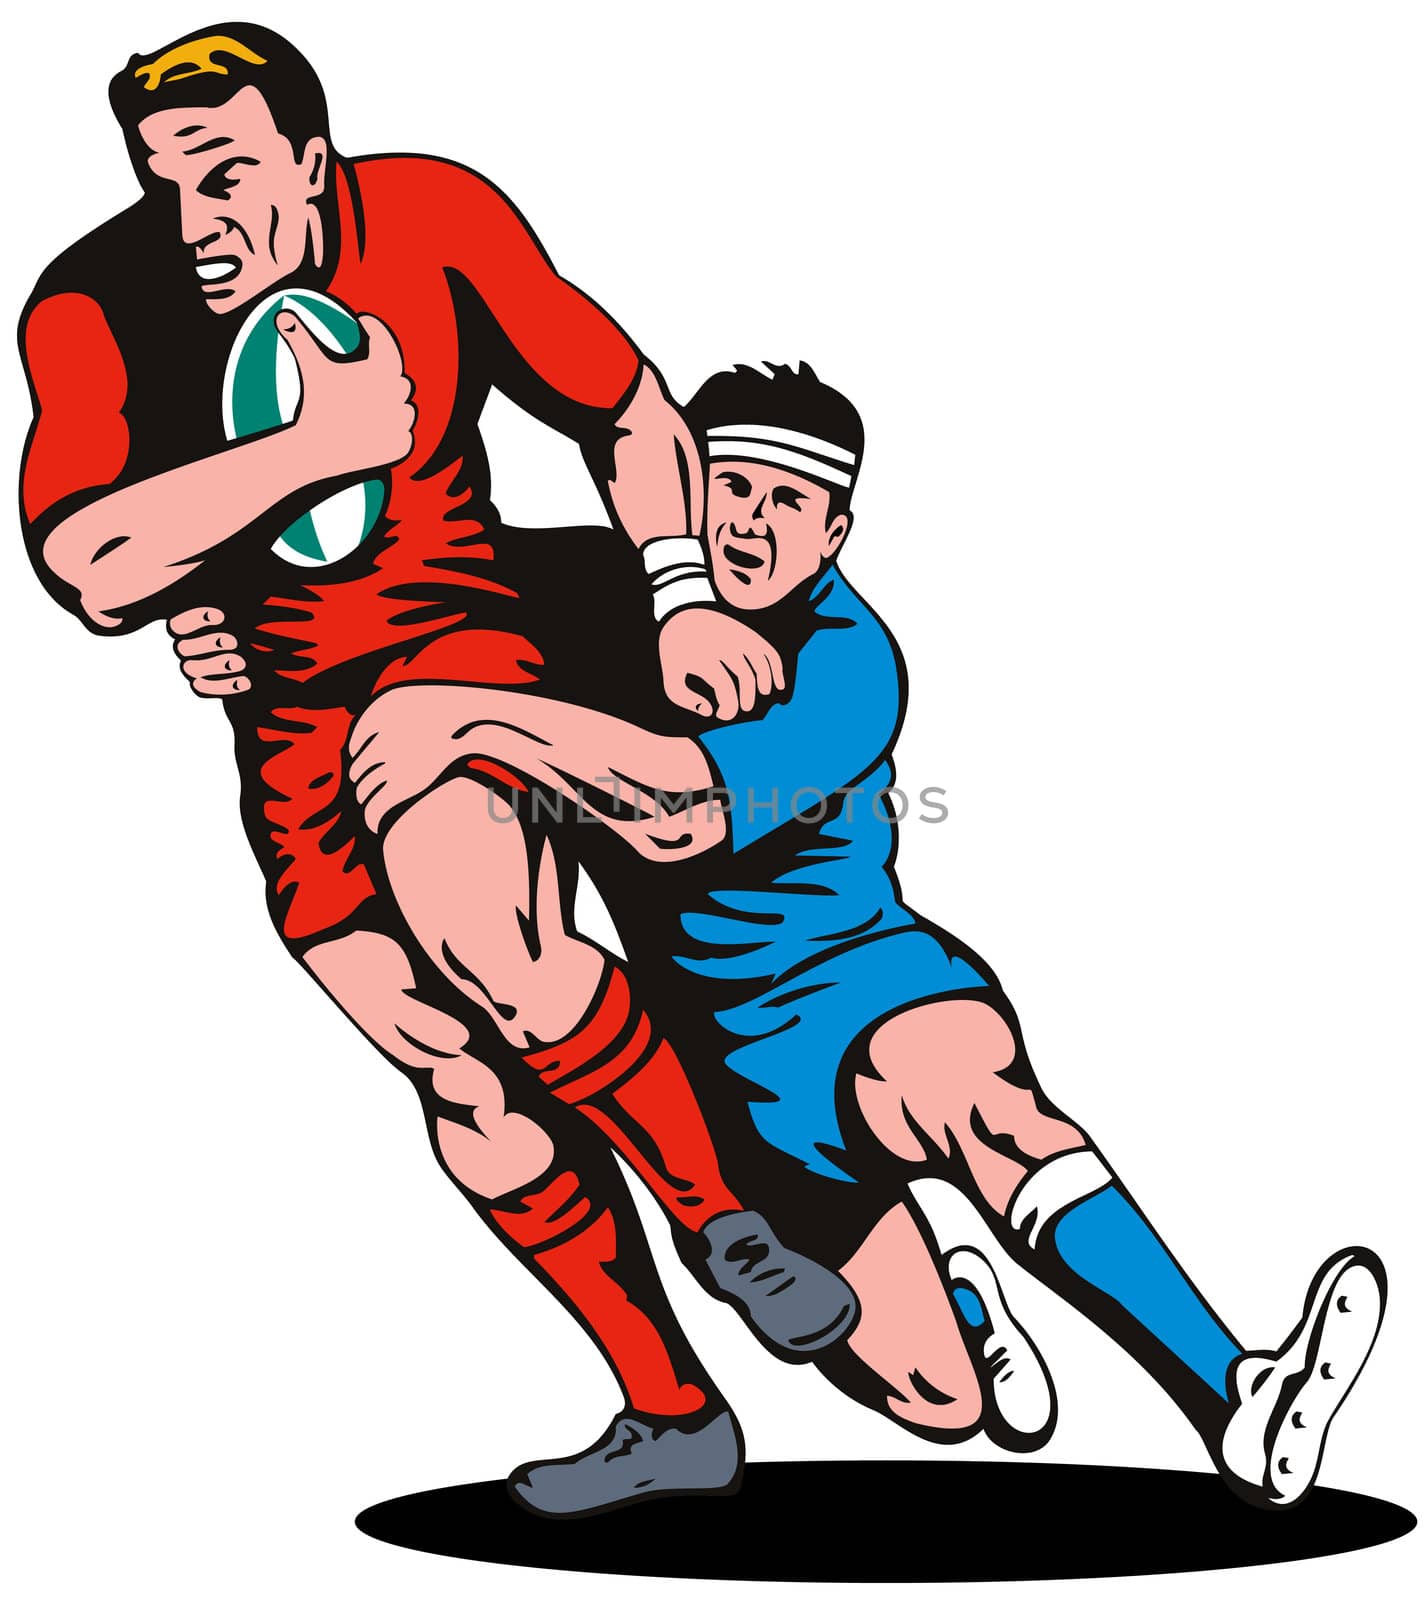 illustration of a rugby player running passing the ball being tackled on isolated background 